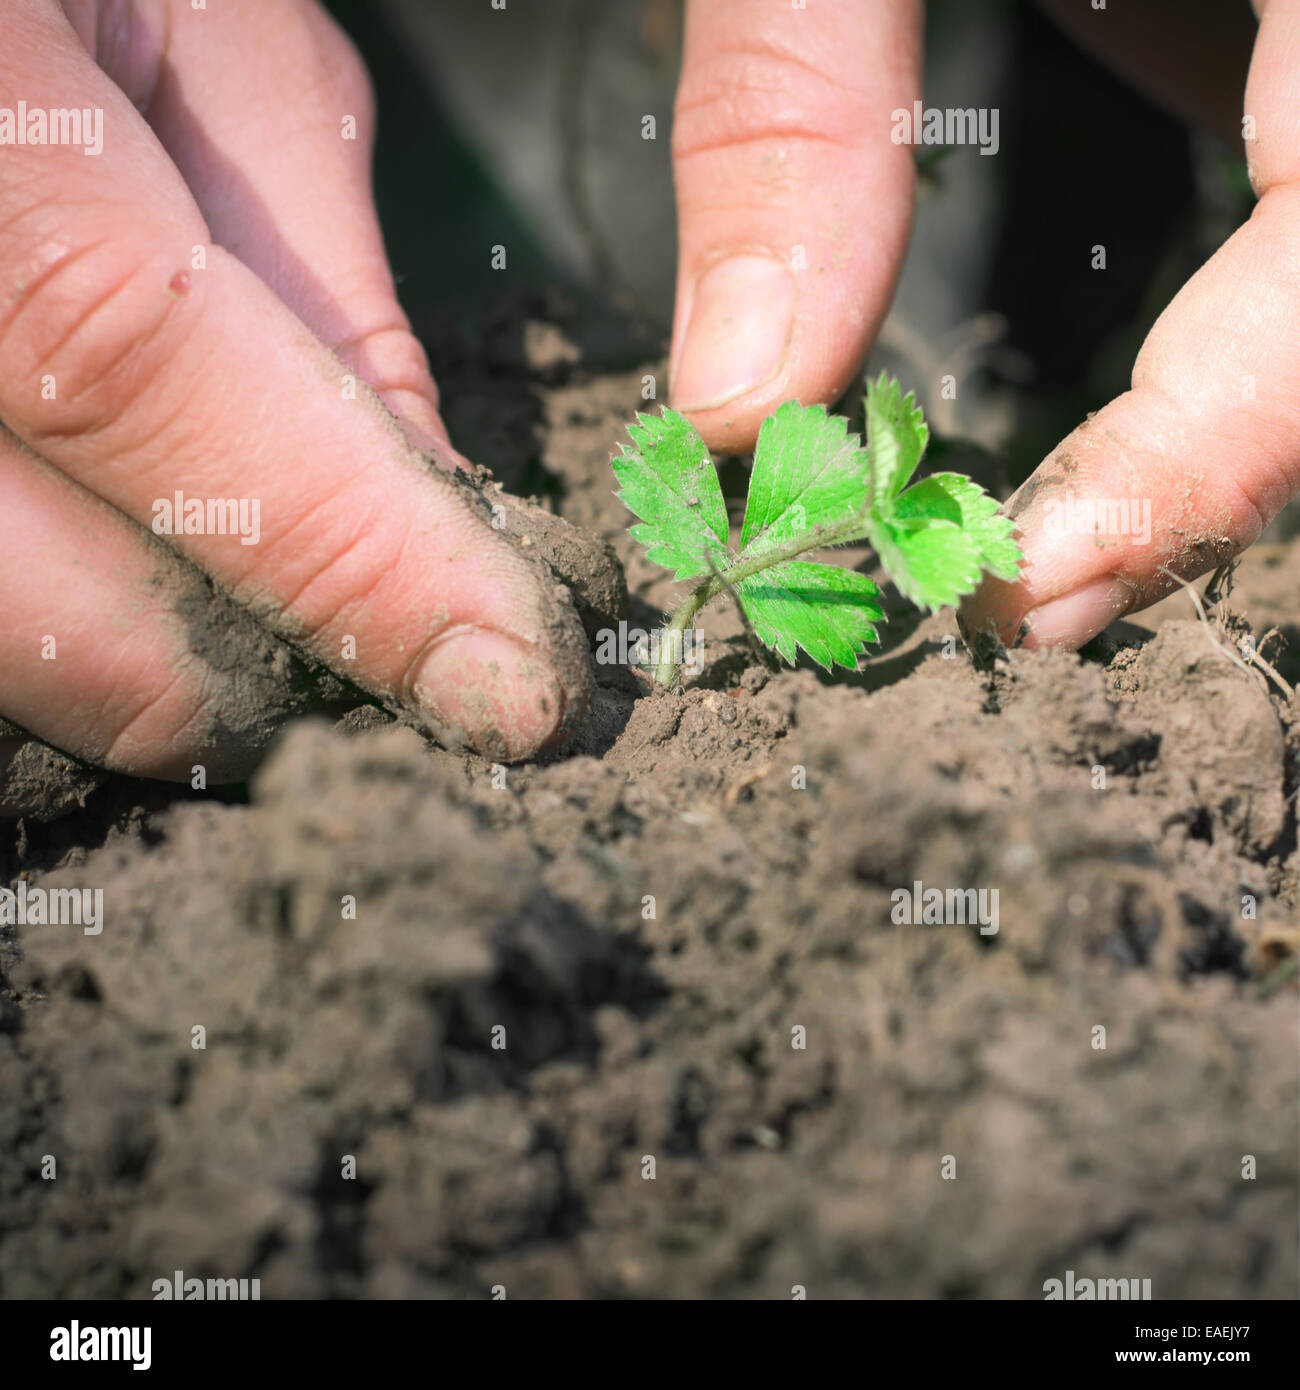 Woman's hands holding strawberry in dirt Stock Photo